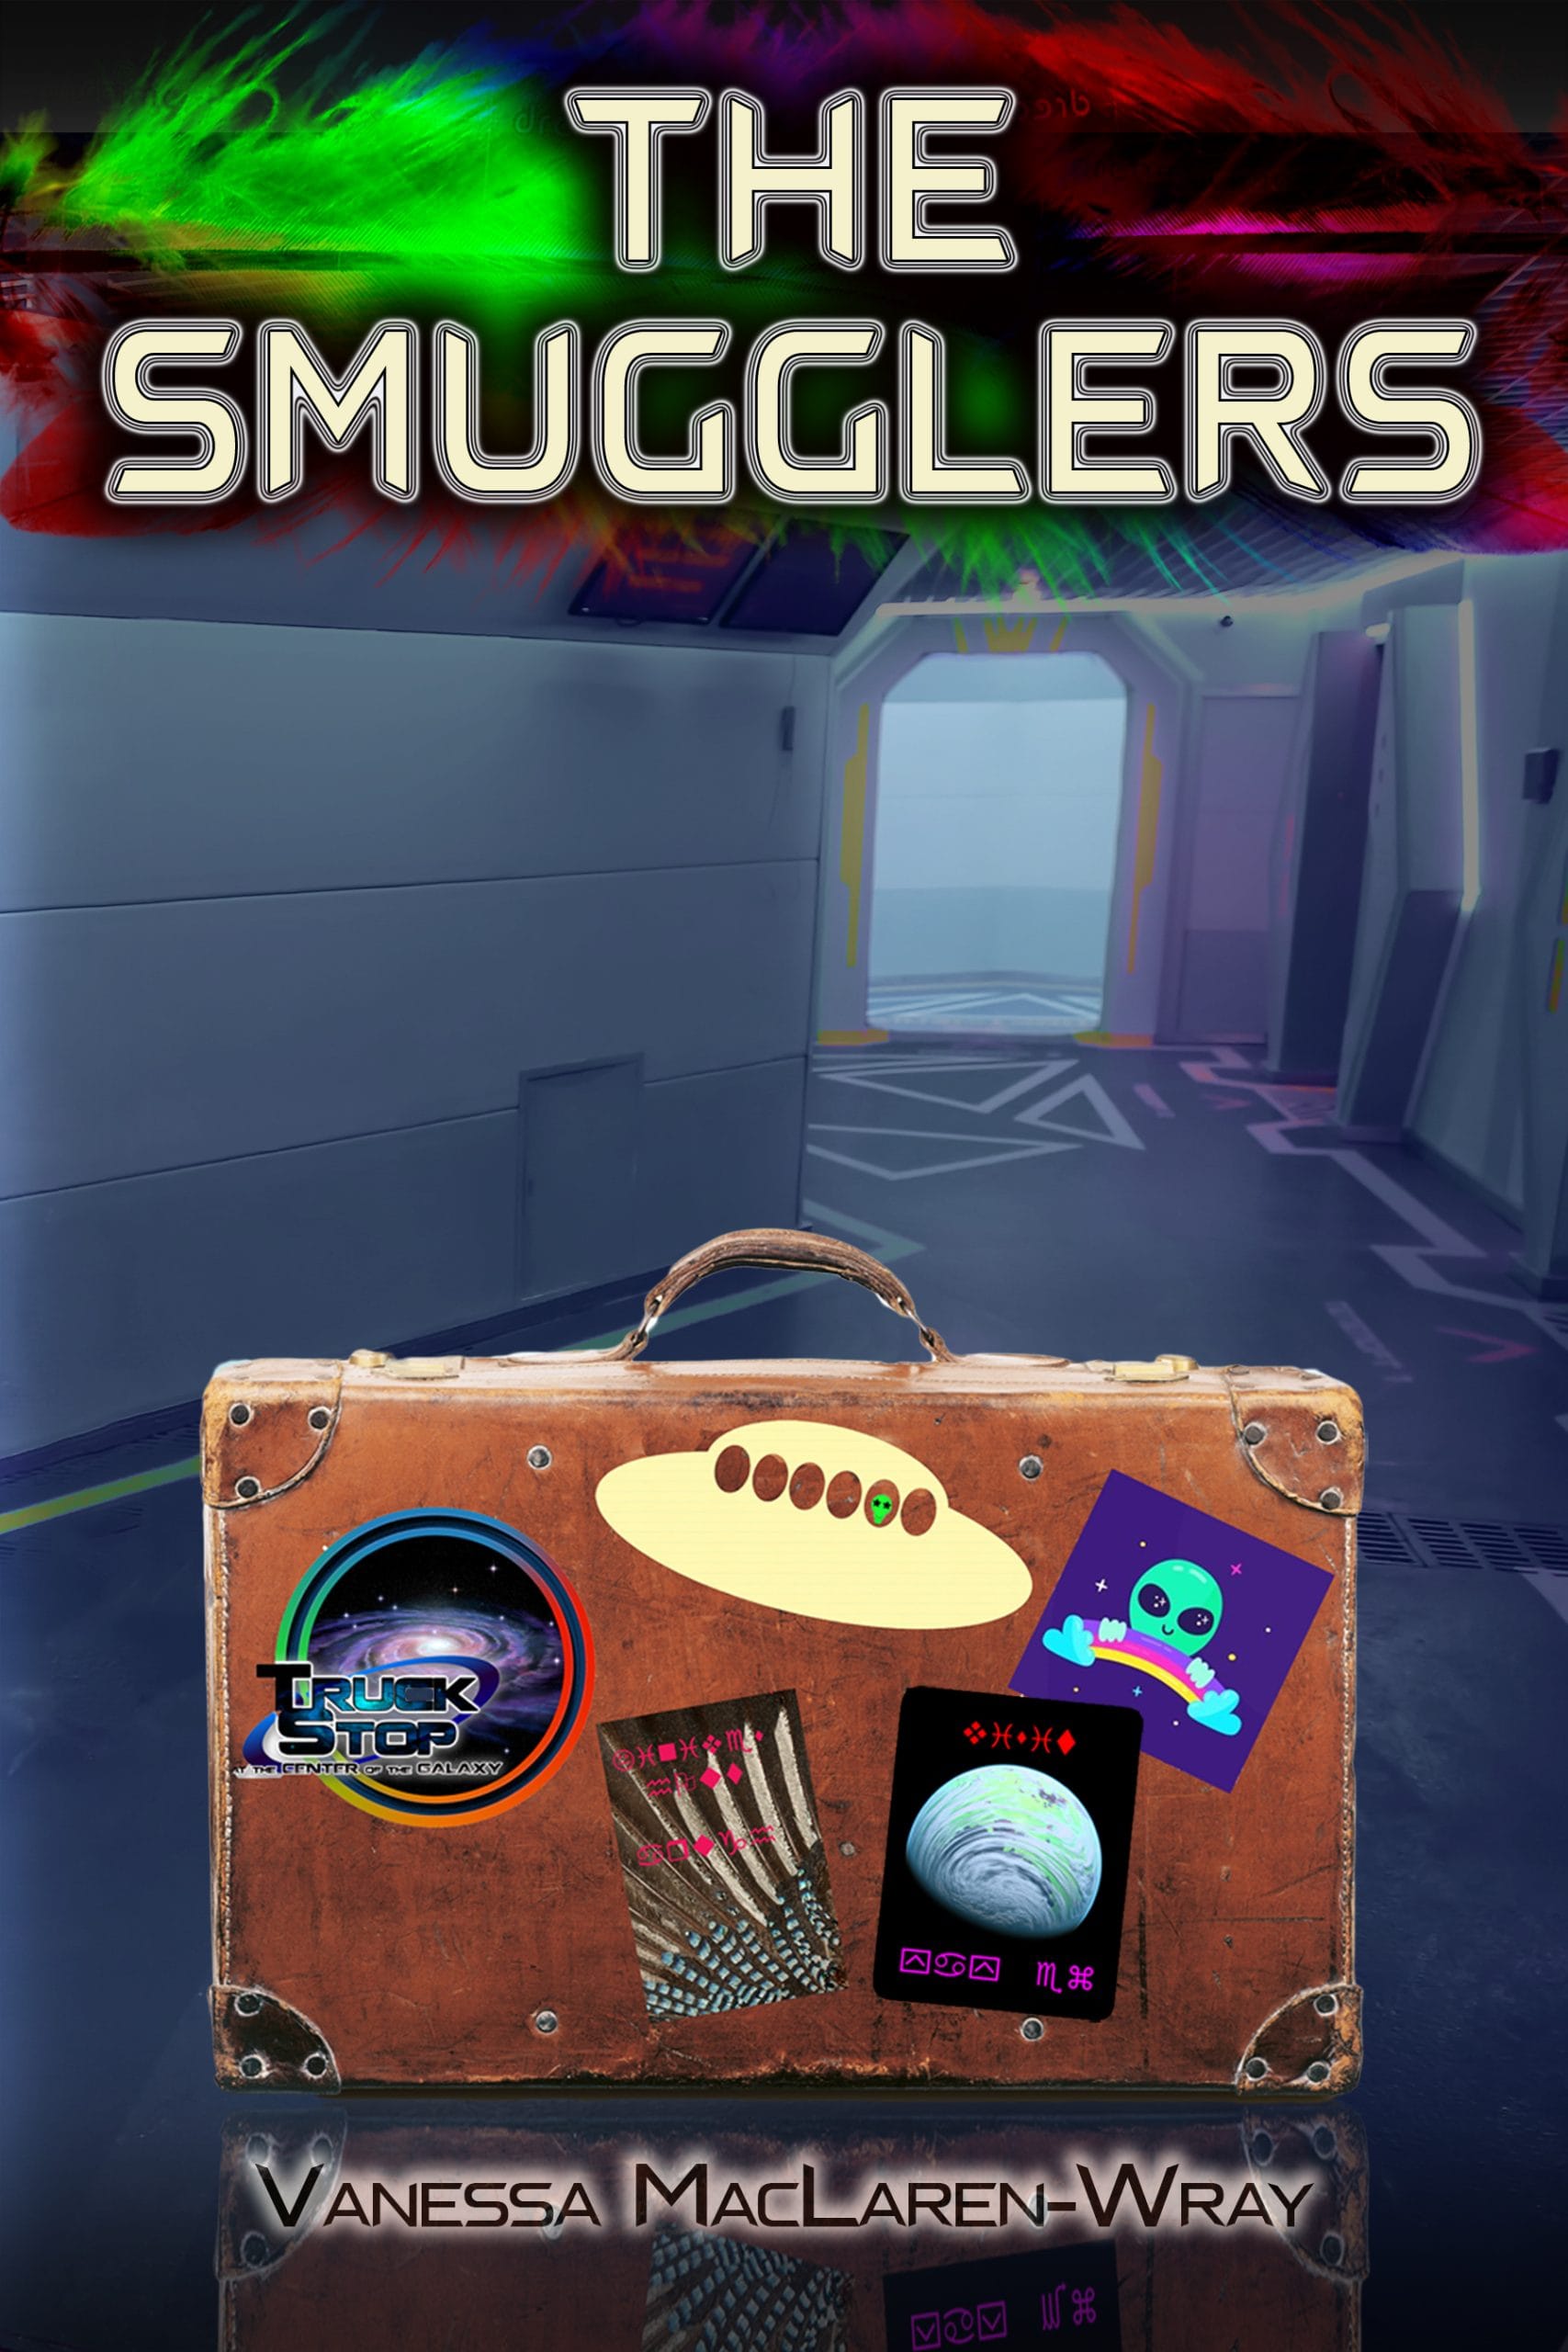 Book cover: The Smugglers by Vanessa MacLaren-Wray. Suitcase in a spaceship.